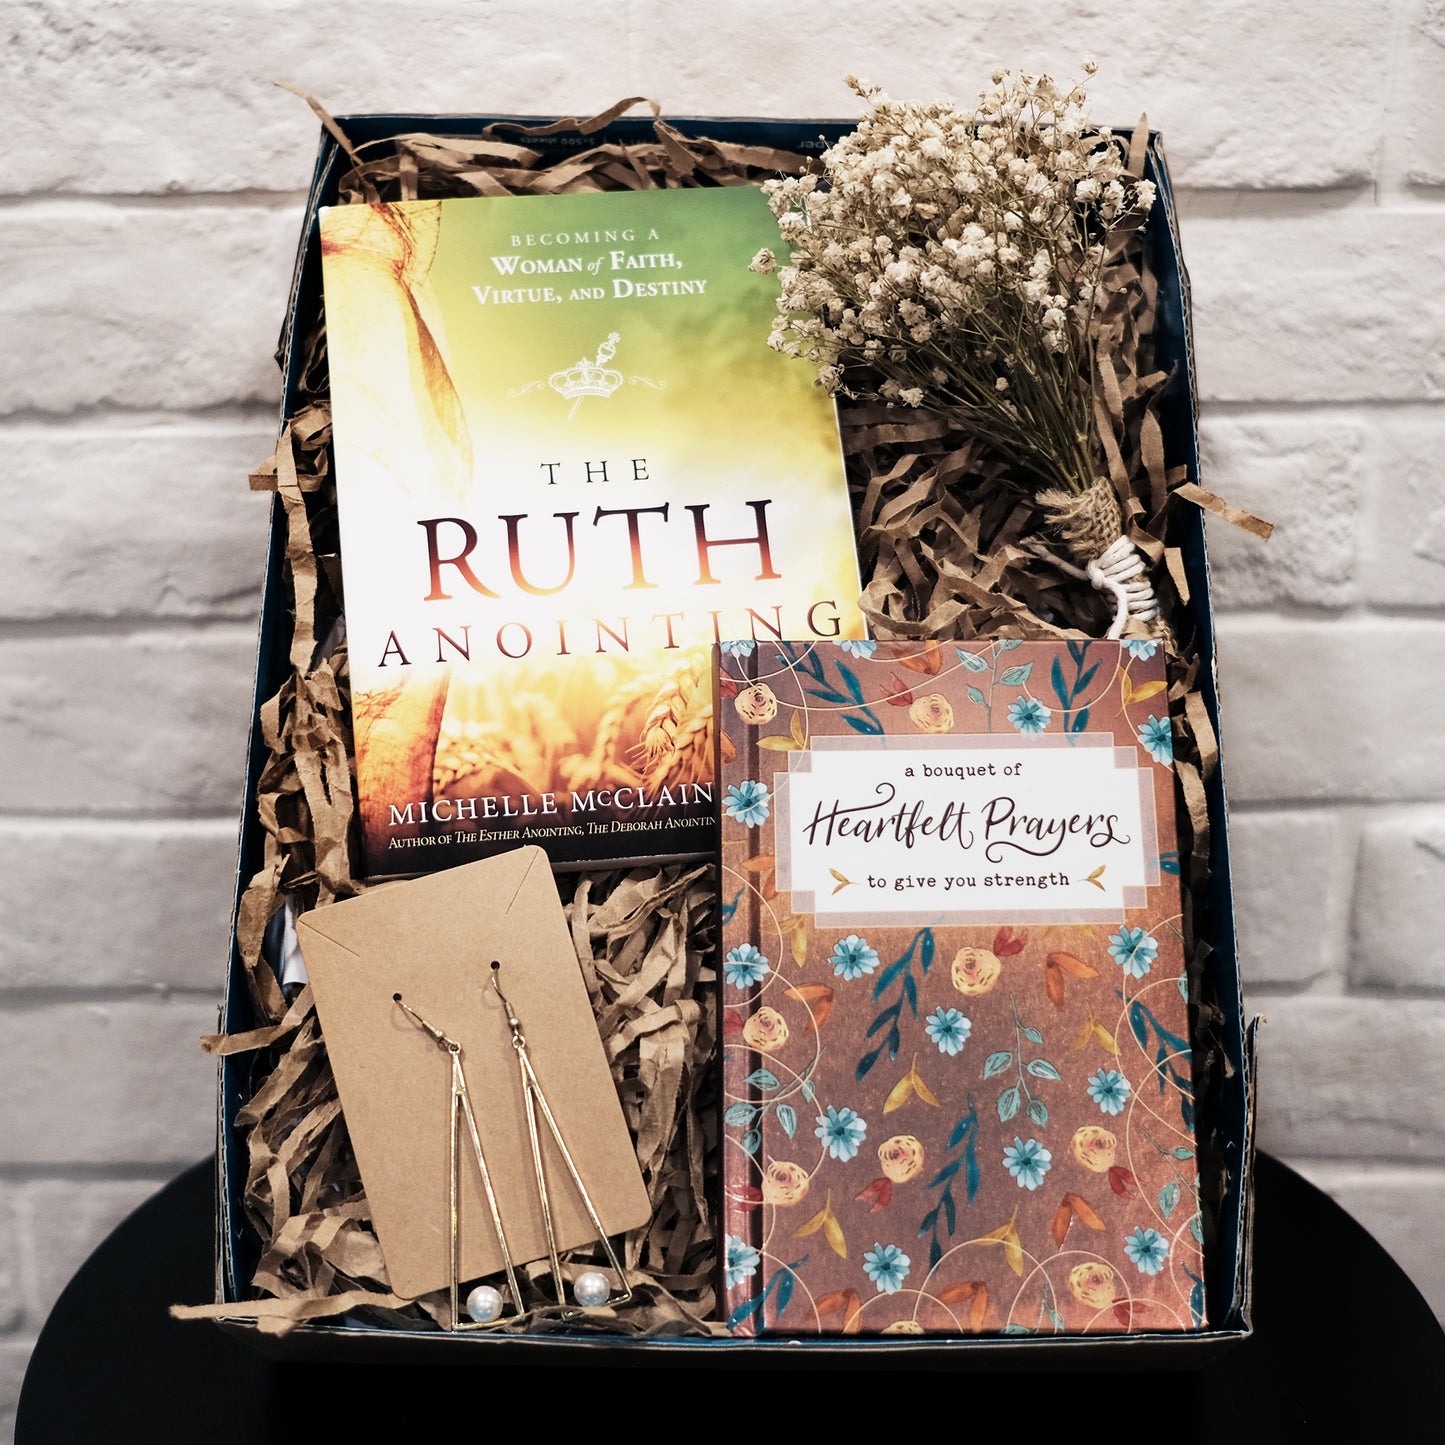 The Ruth Anointing Bundle